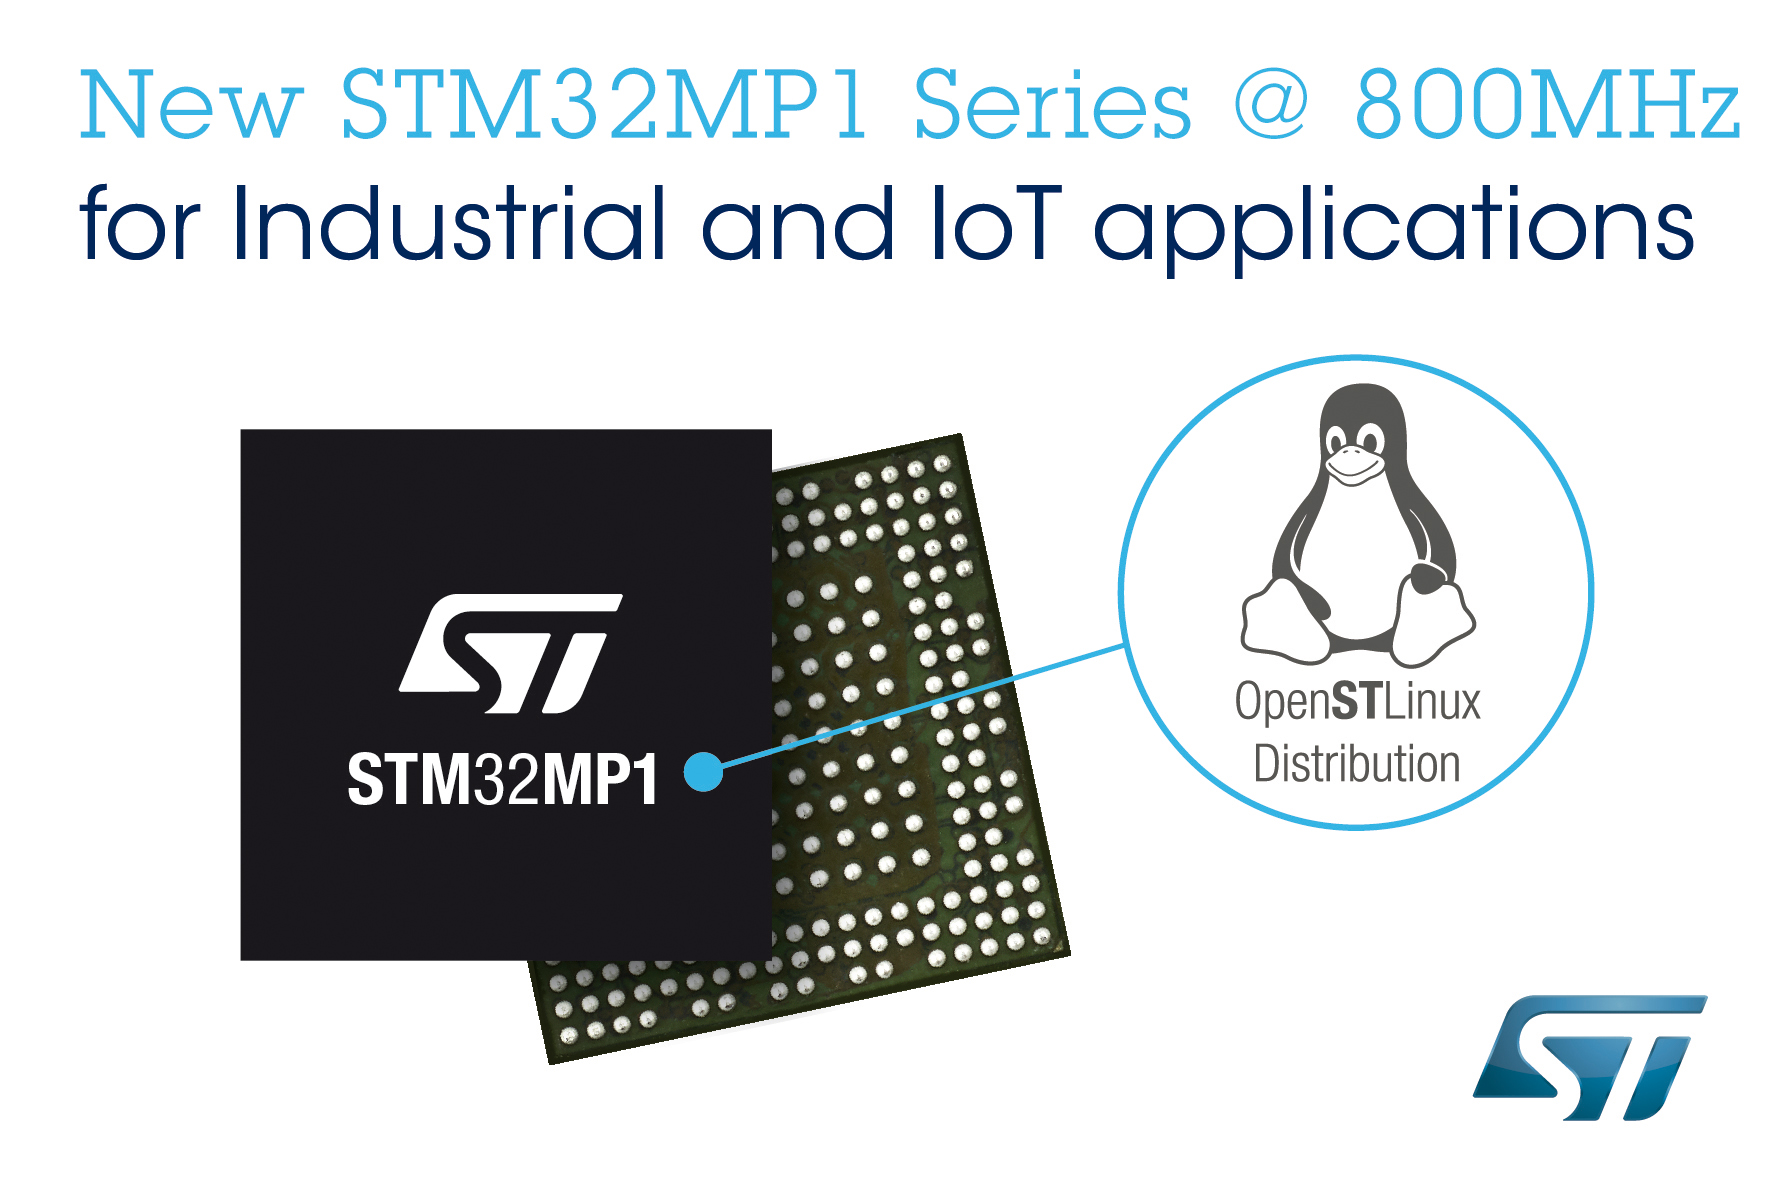 STMicroelectronics Boosts Performance While Enhancing Ecosystem on STM32 Microprocessors